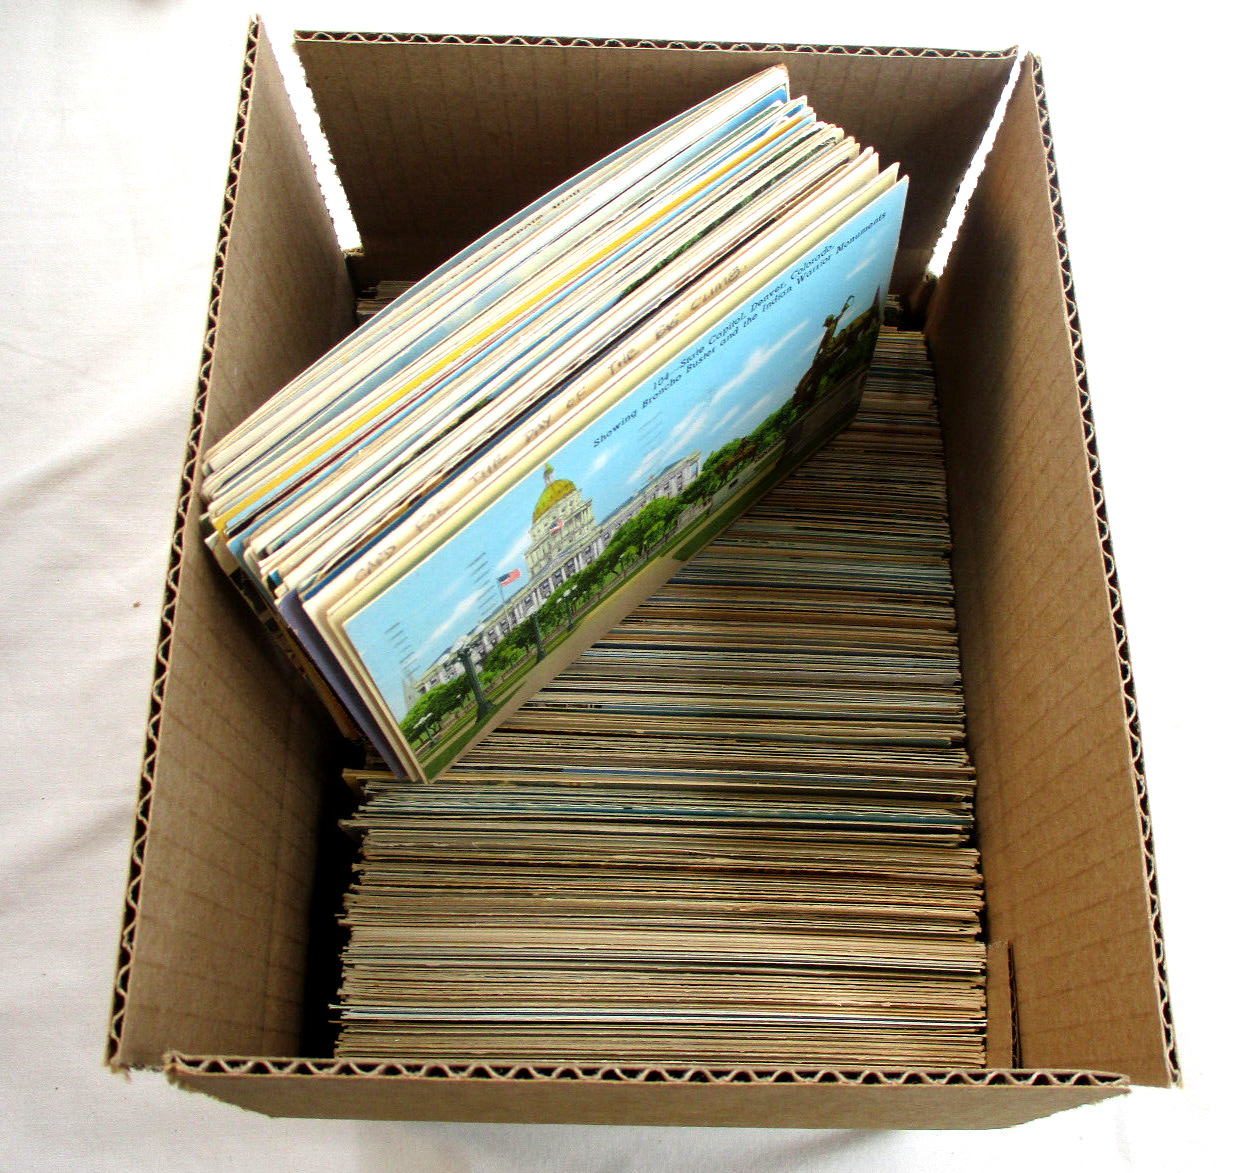 Huge Lot 700 POSTCARDS Mostly US All Eras Cities Greetings Places All Standard